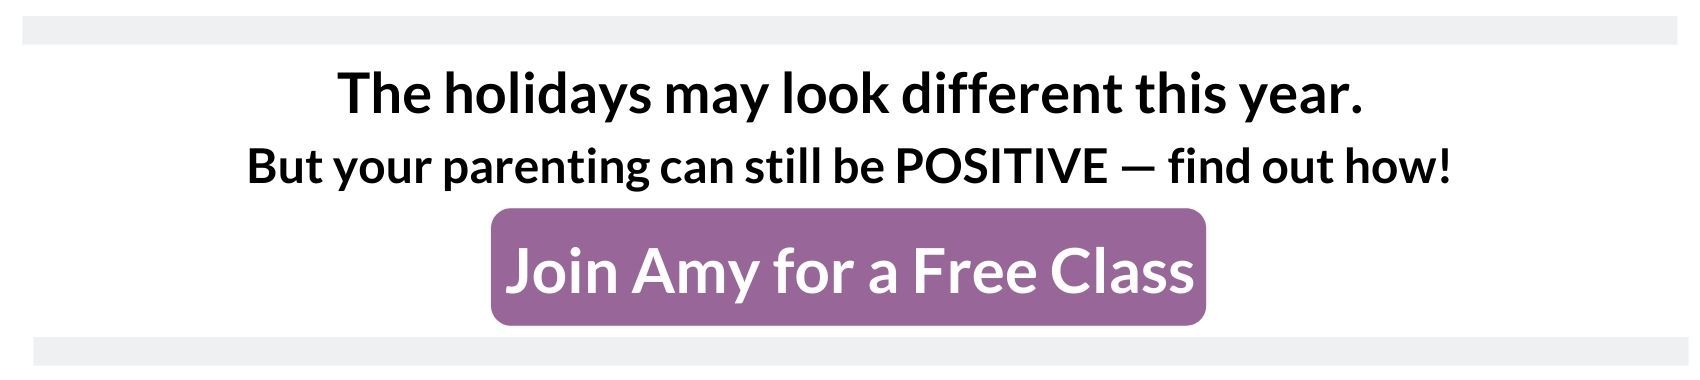 join amy for a free class